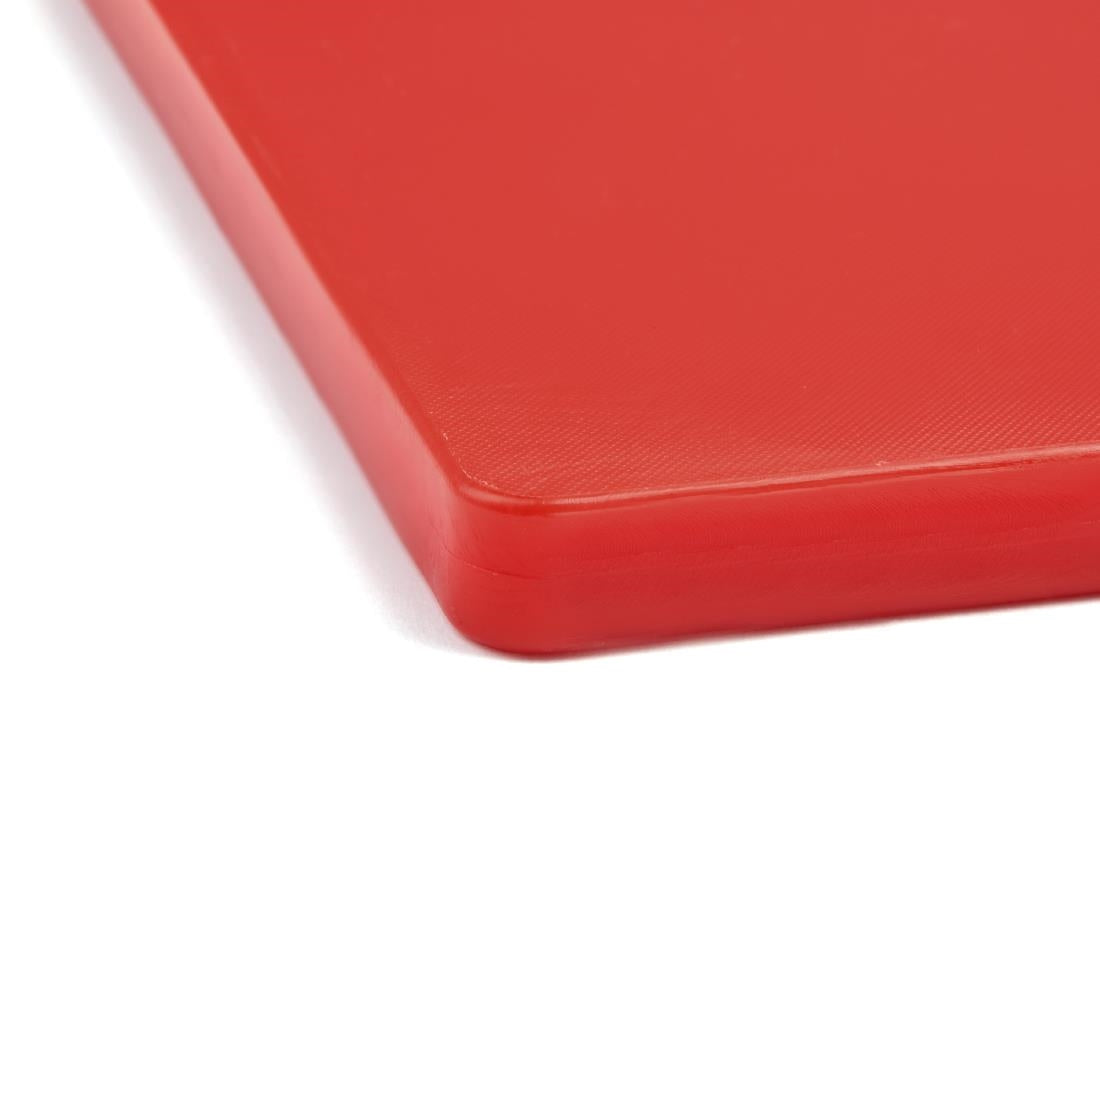 DM004 Hygiplas Extra Thick Low Density Red Chopping Board Standard JD Catering Equipment Solutions Ltd